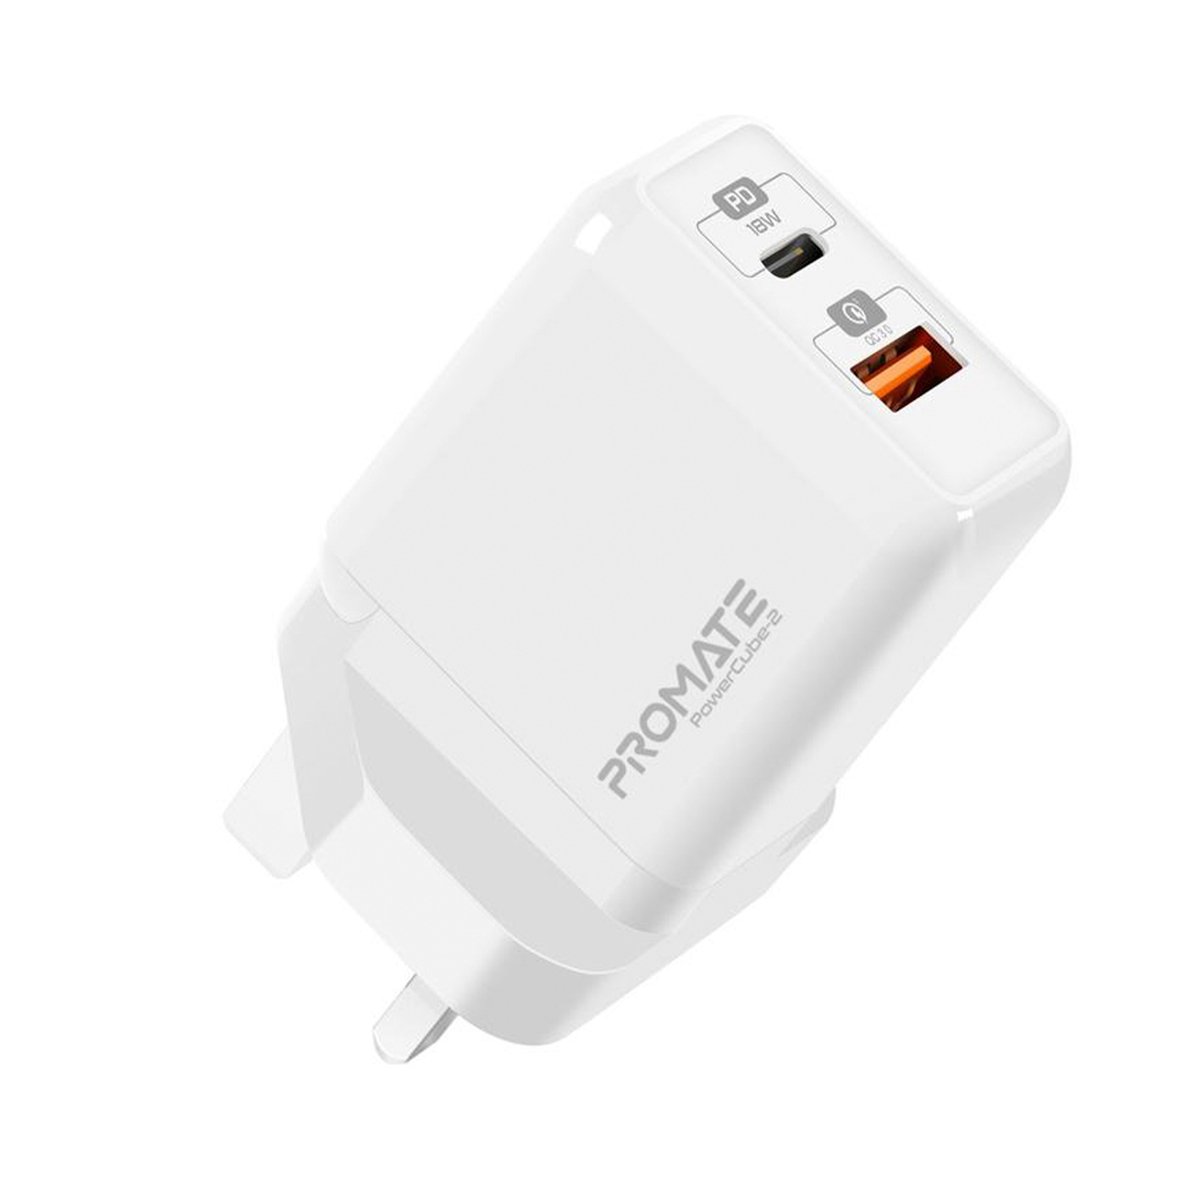 PROMATE Promate Wall Charger Assorted Colors(Available color will be shipped)(POWERCUBE-2)